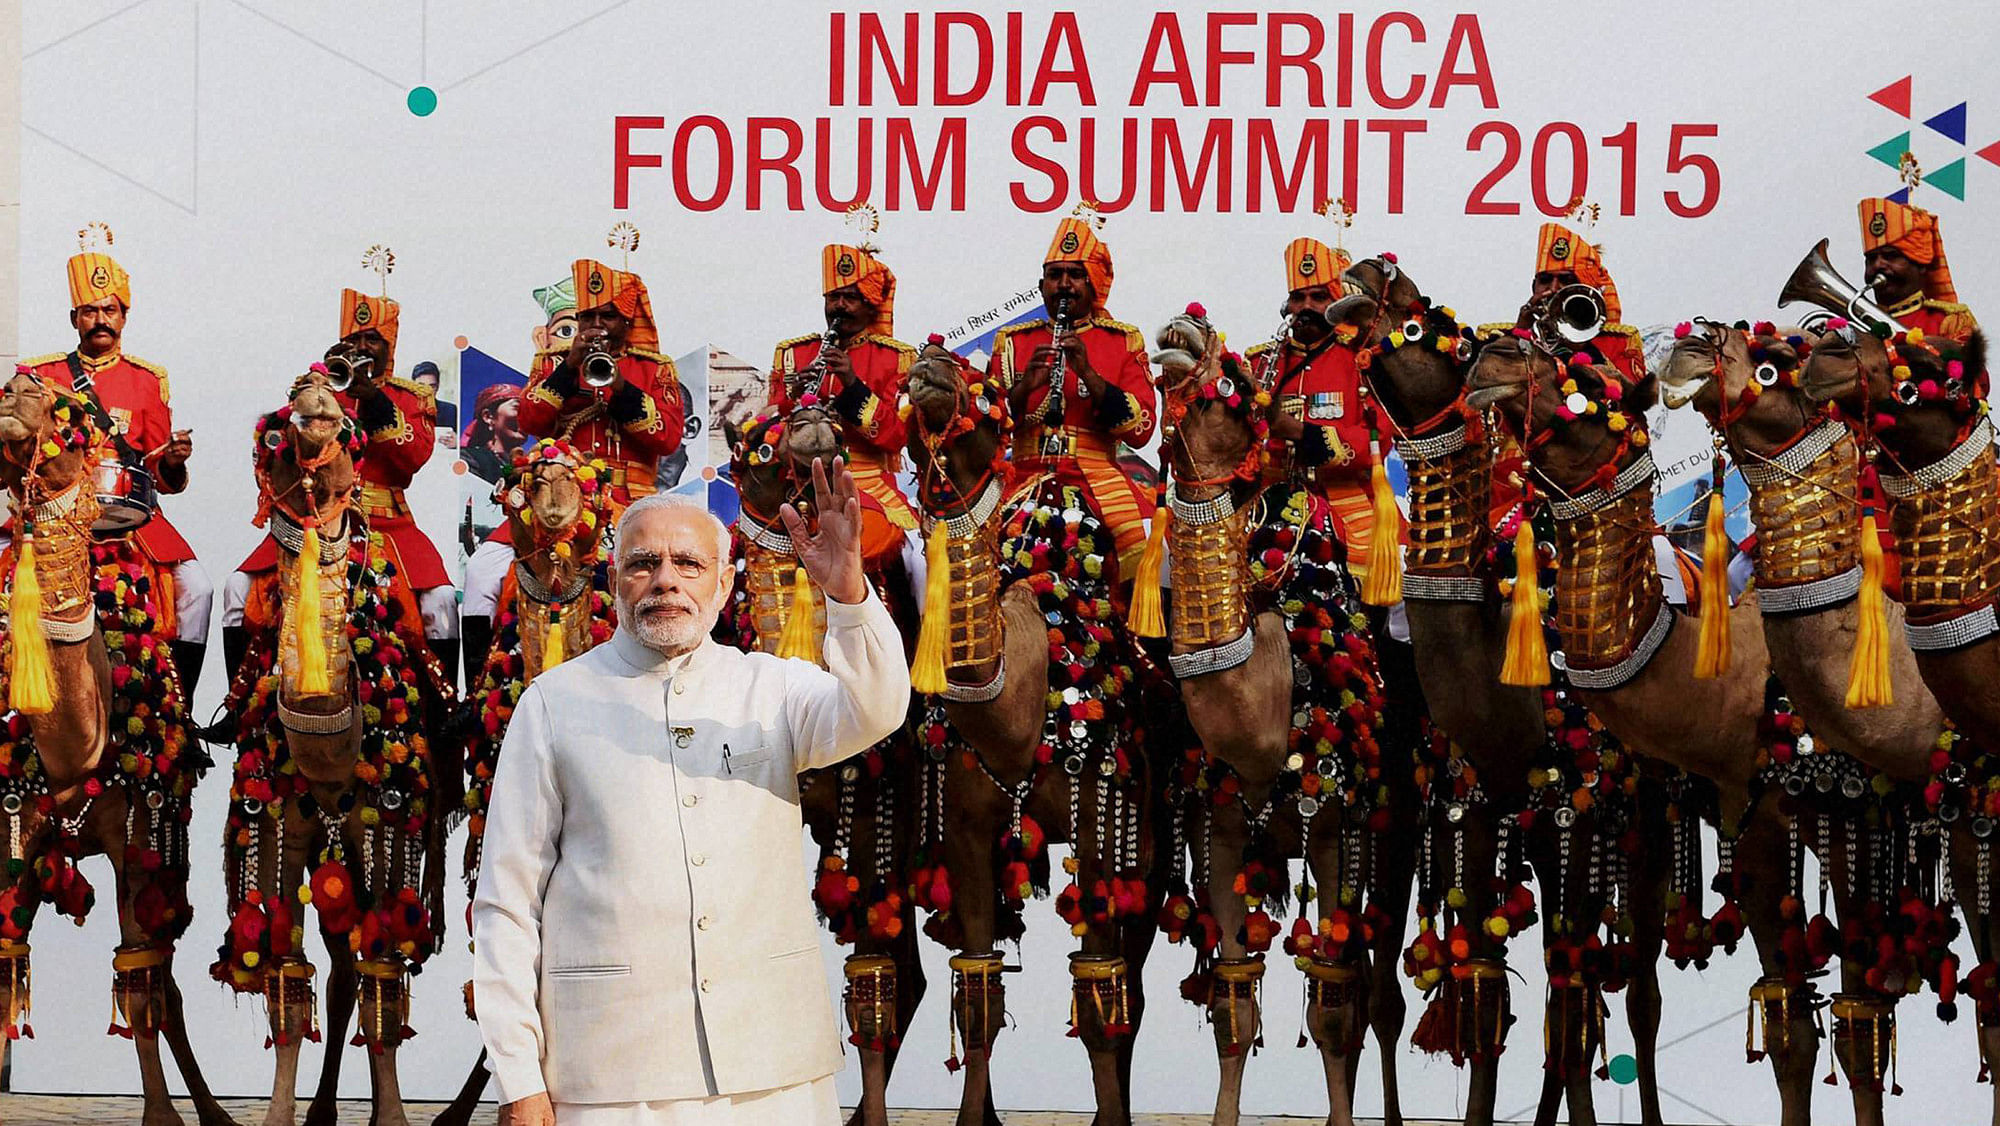 Prime Minister Narendra Modi during the India Africa Forum Summit at Indira Gandhi Sports Complex, in New Delhi on Thursday. (Photo: PTI)